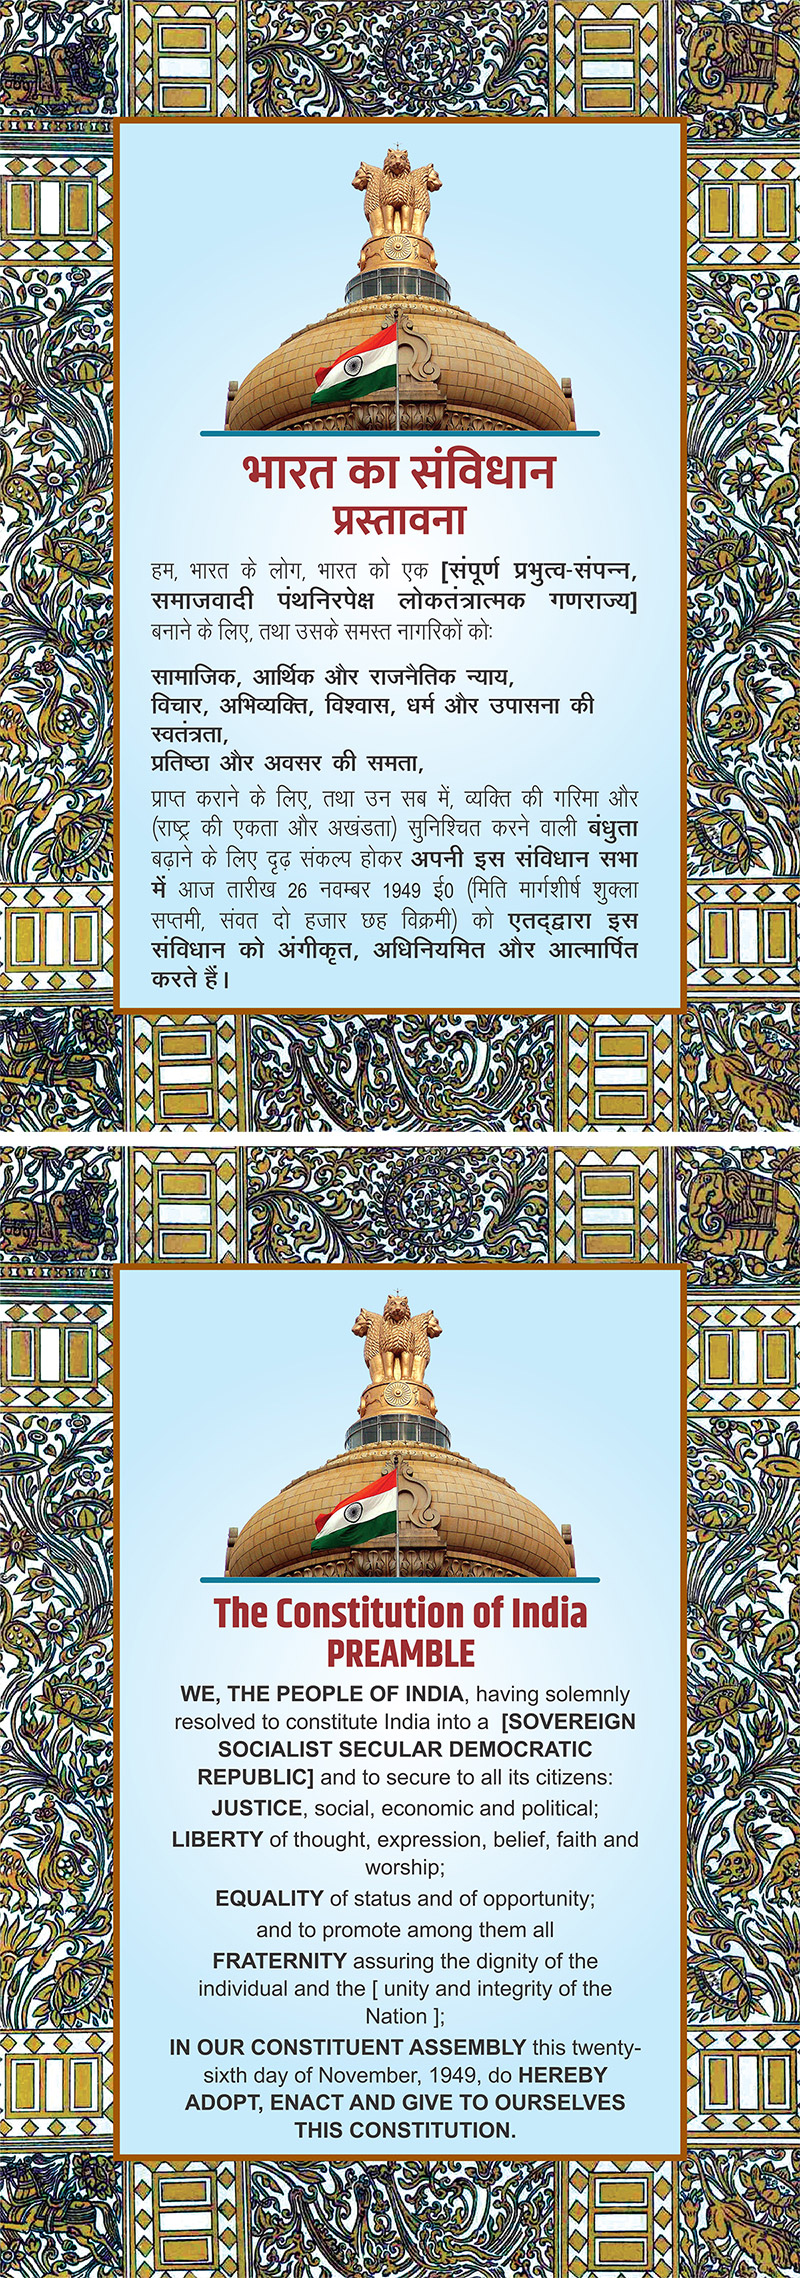 The Constitution of India Preamble